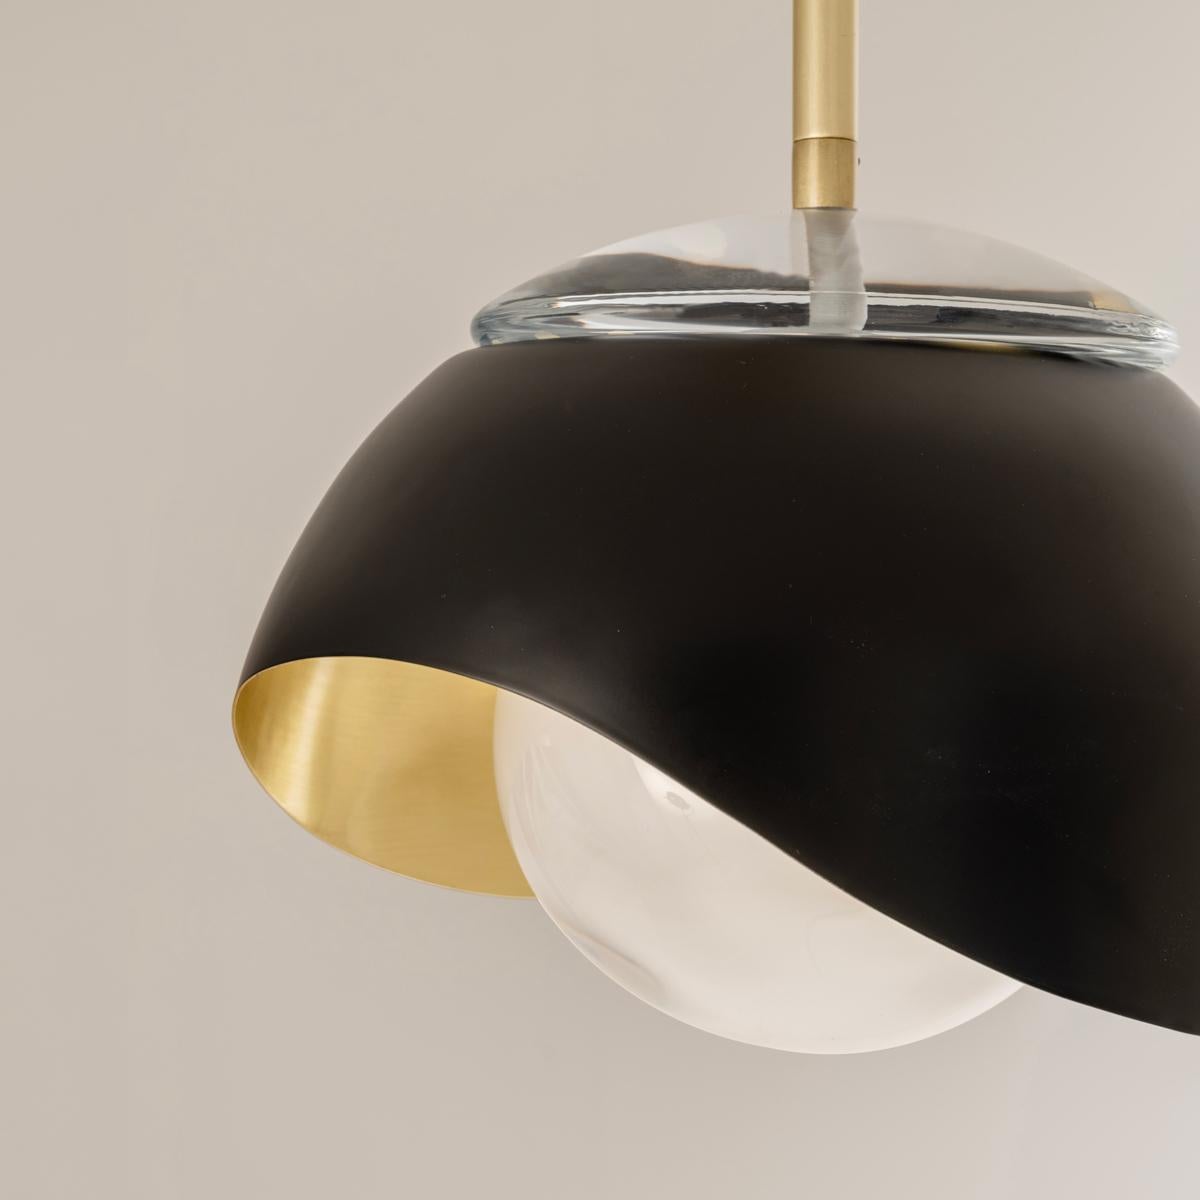 Perla Pendant by Gaspare Asaro-White and Satin Brass For Sale 1